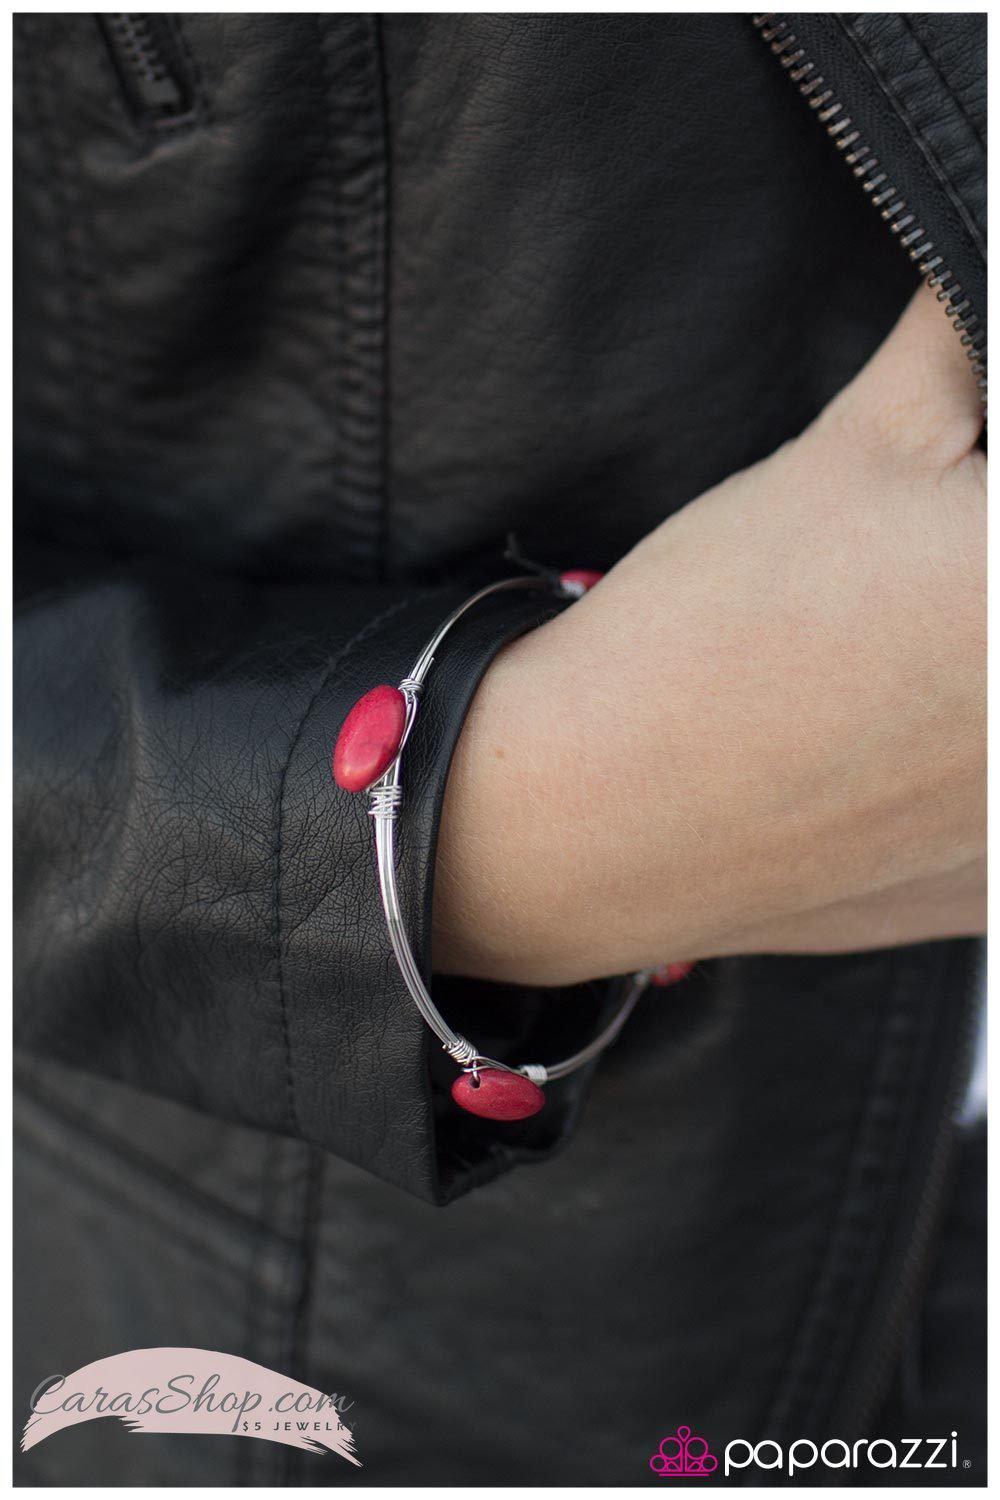 The Dry Lands Red Stone Bangle Bracelet - Paparazzi Accessories-CarasShop.com - $5 Jewelry by Cara Jewels